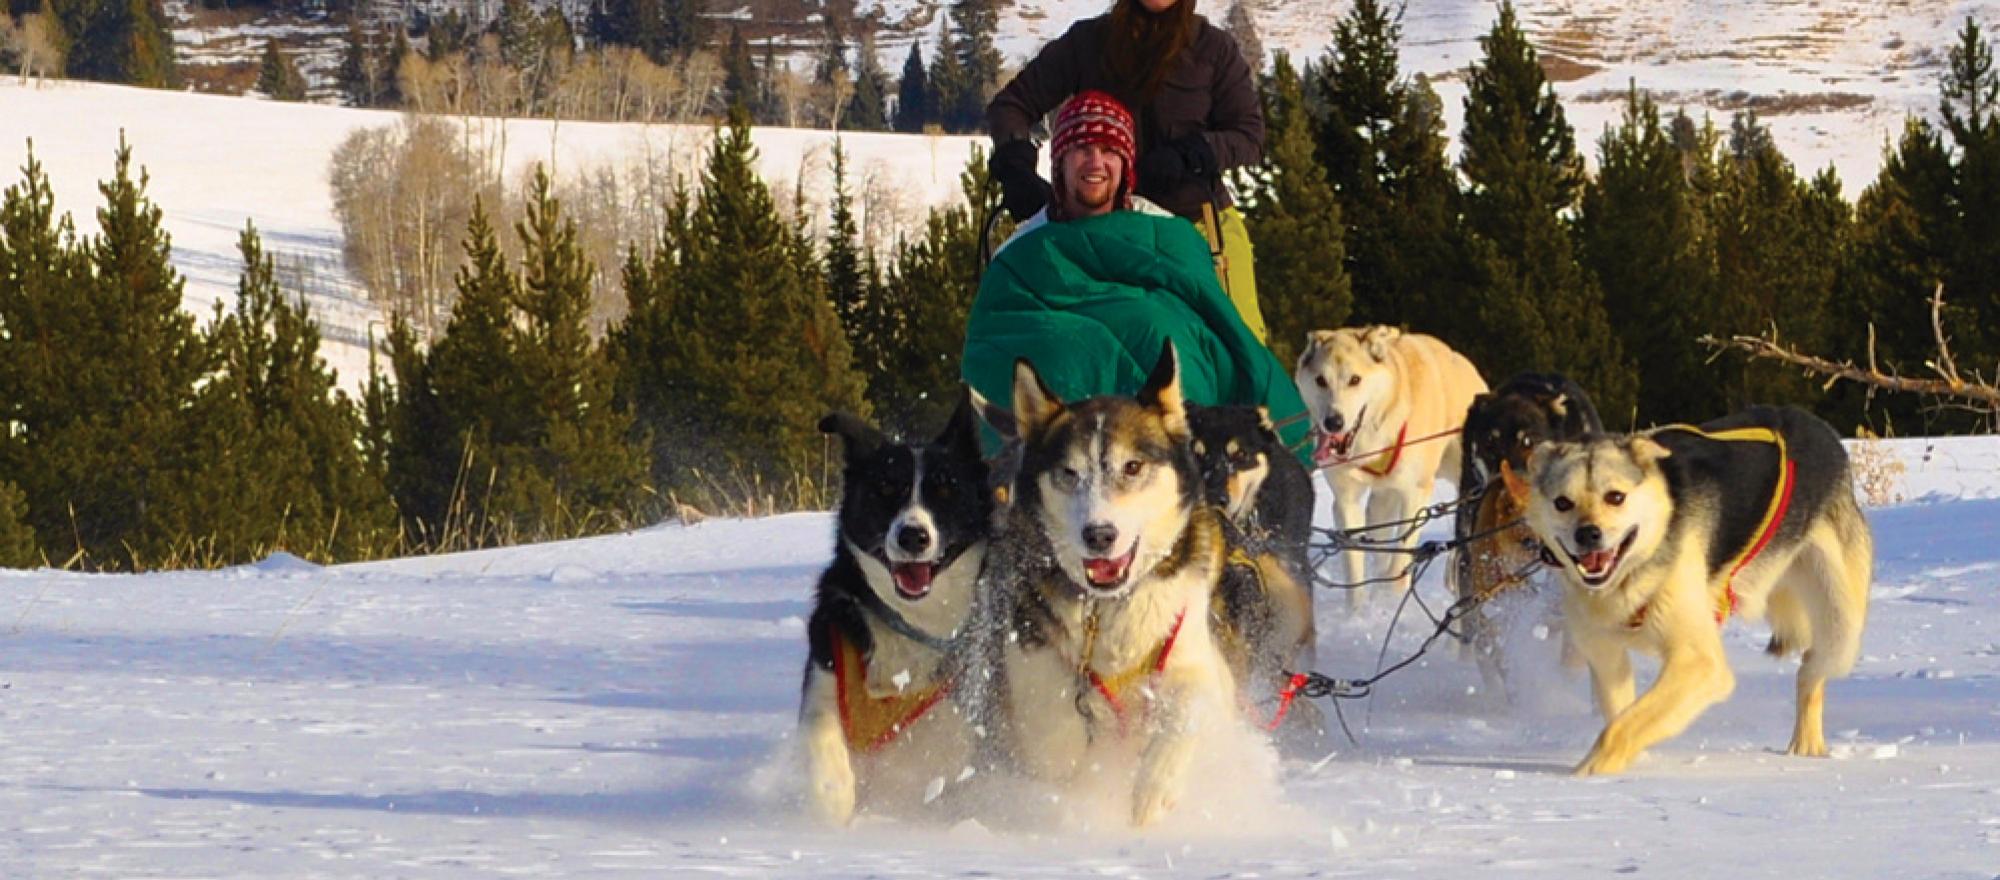 Dogsledding in Yellowstone National Park.